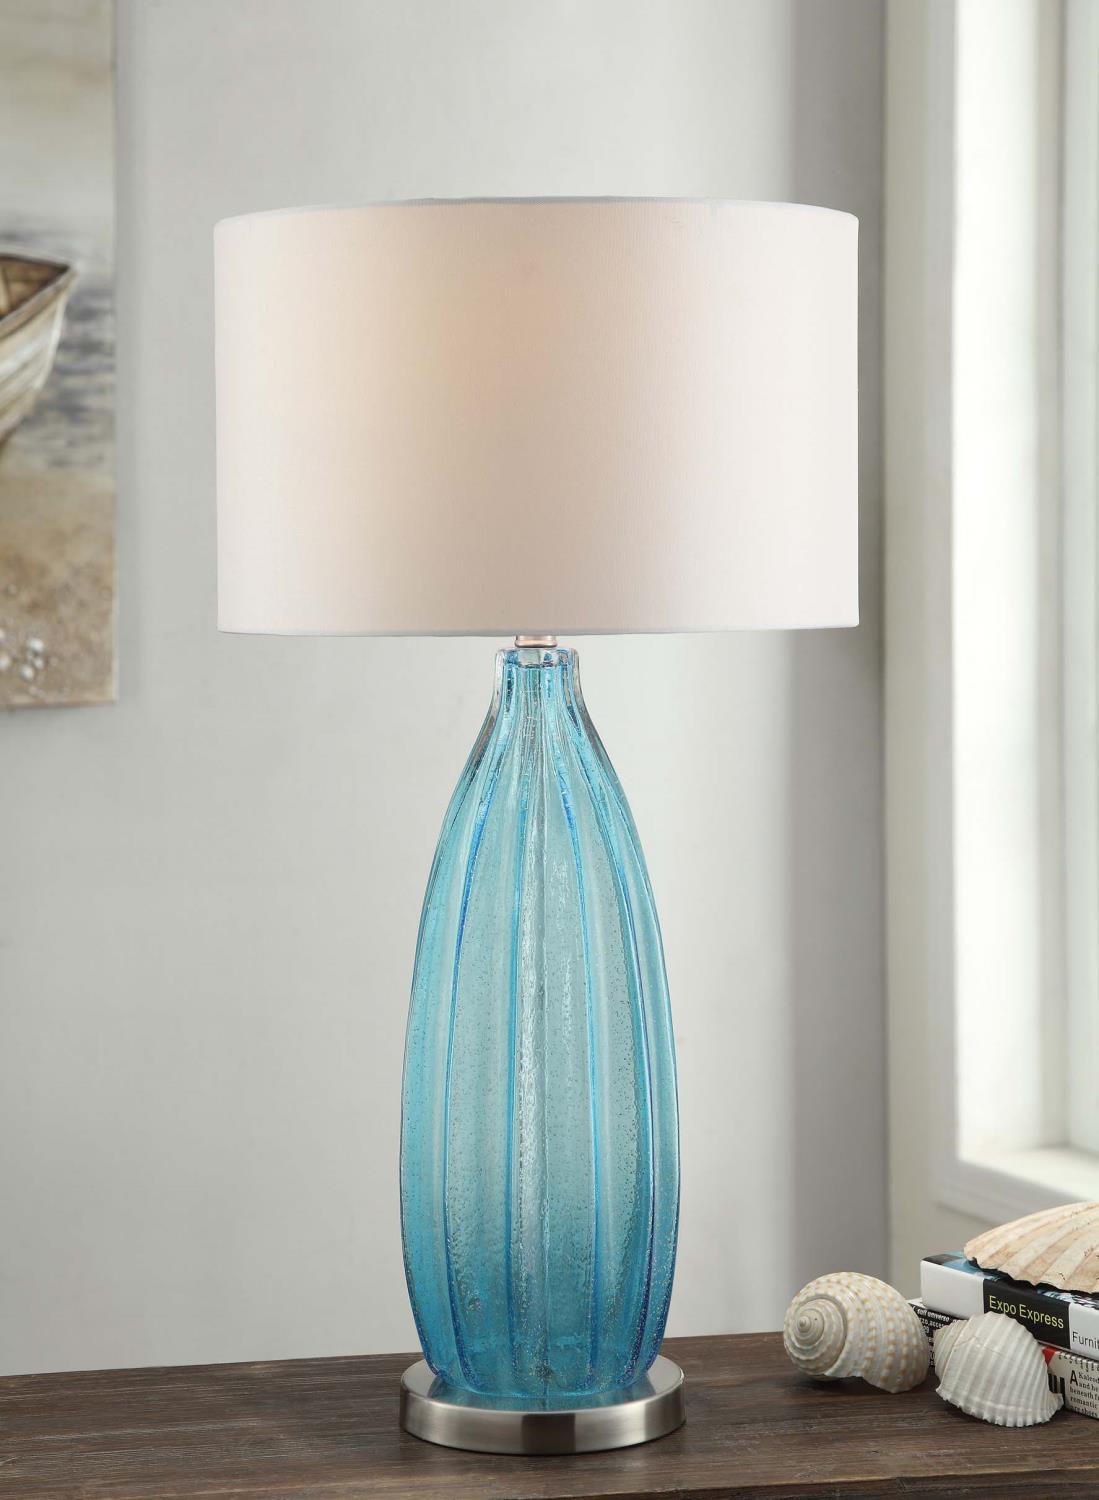 Blue Glass Table Lamp - image 1 of 2